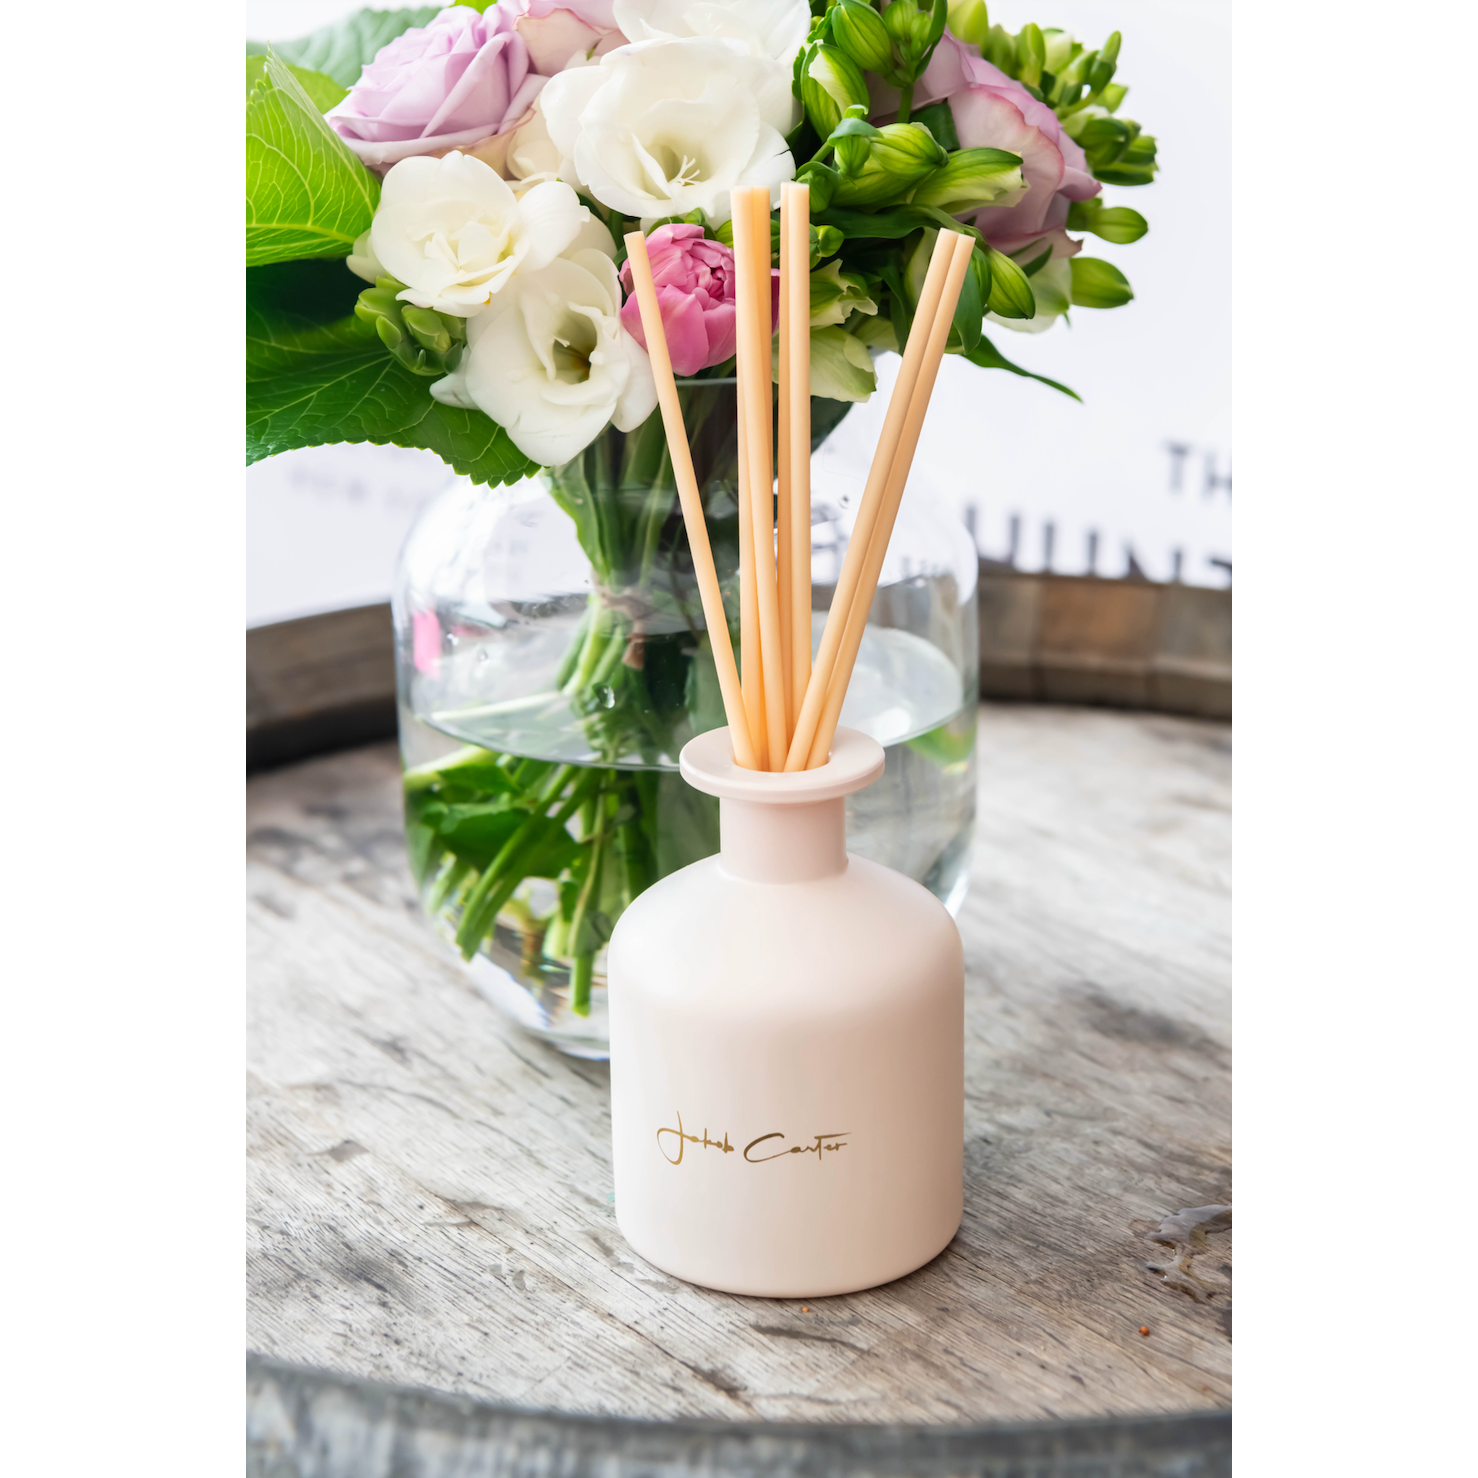 WHITE LILY, BROWN SUGAR & FIG TRIPLE SCENTED REED DIFFUSER